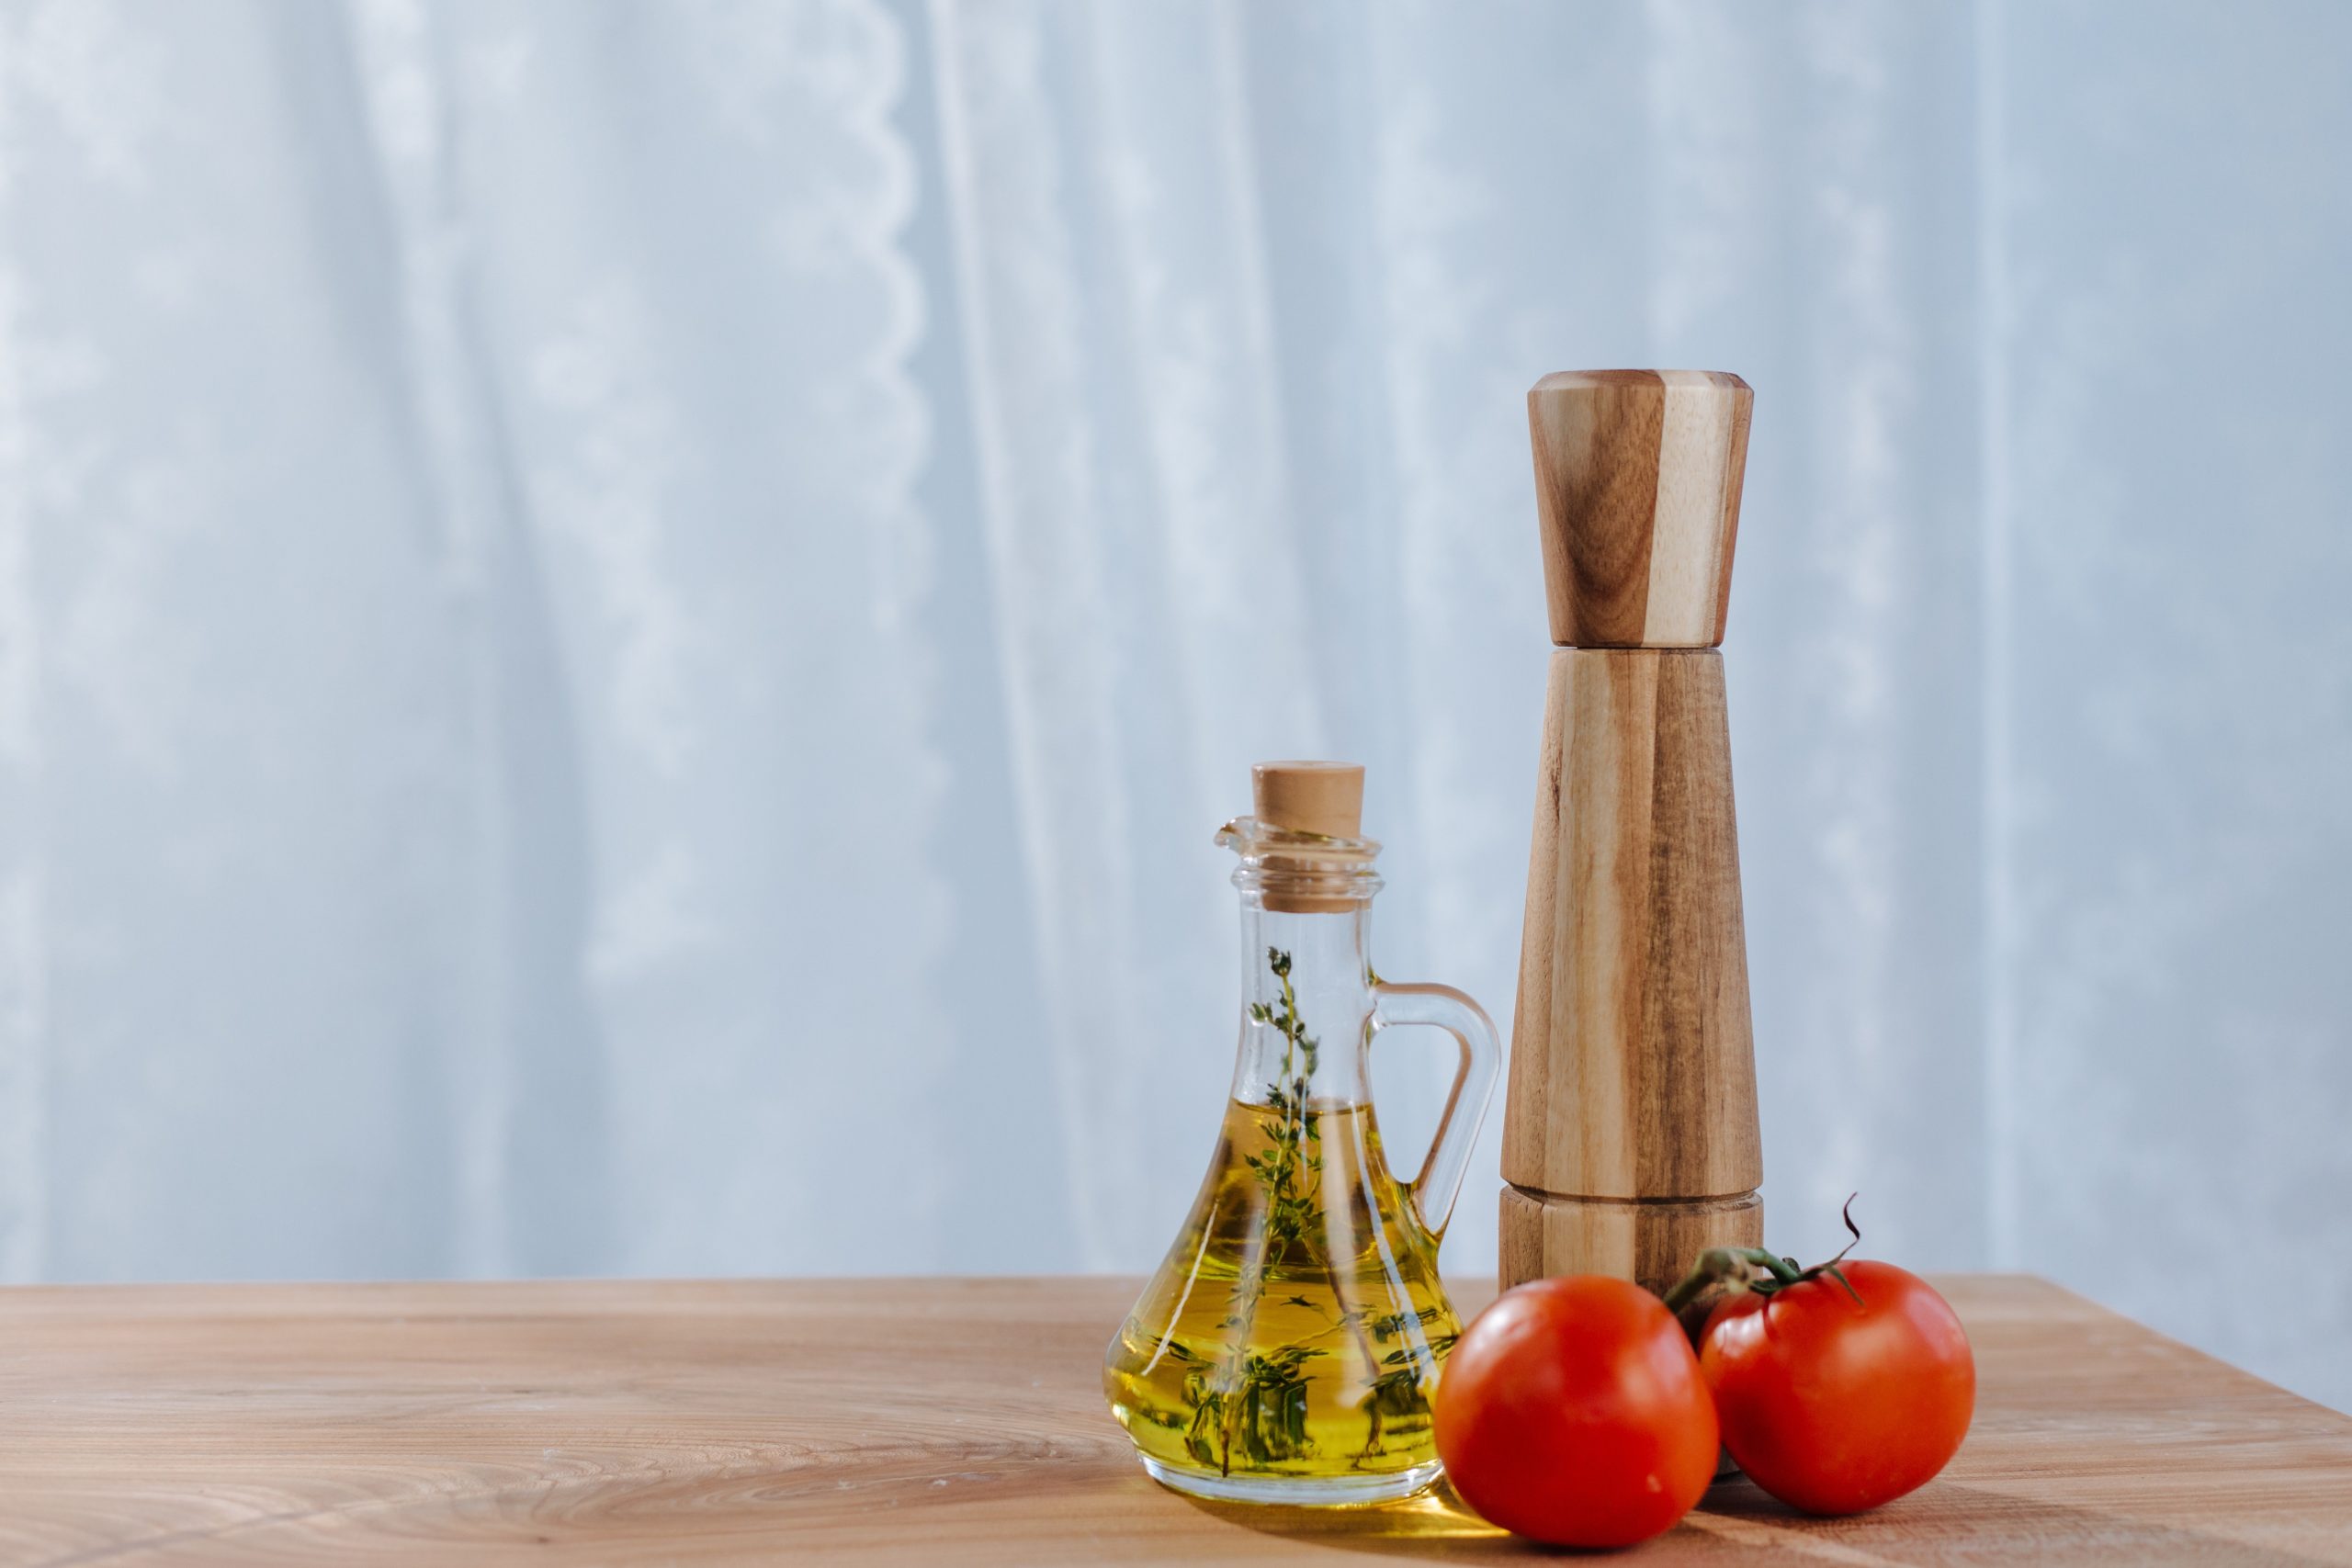 Bottle of olive oil next to a pepper shaker and two tomatoes on a vine. Olive oil is full of unsaturated fats which support brain health and function. Image from Pexels. 